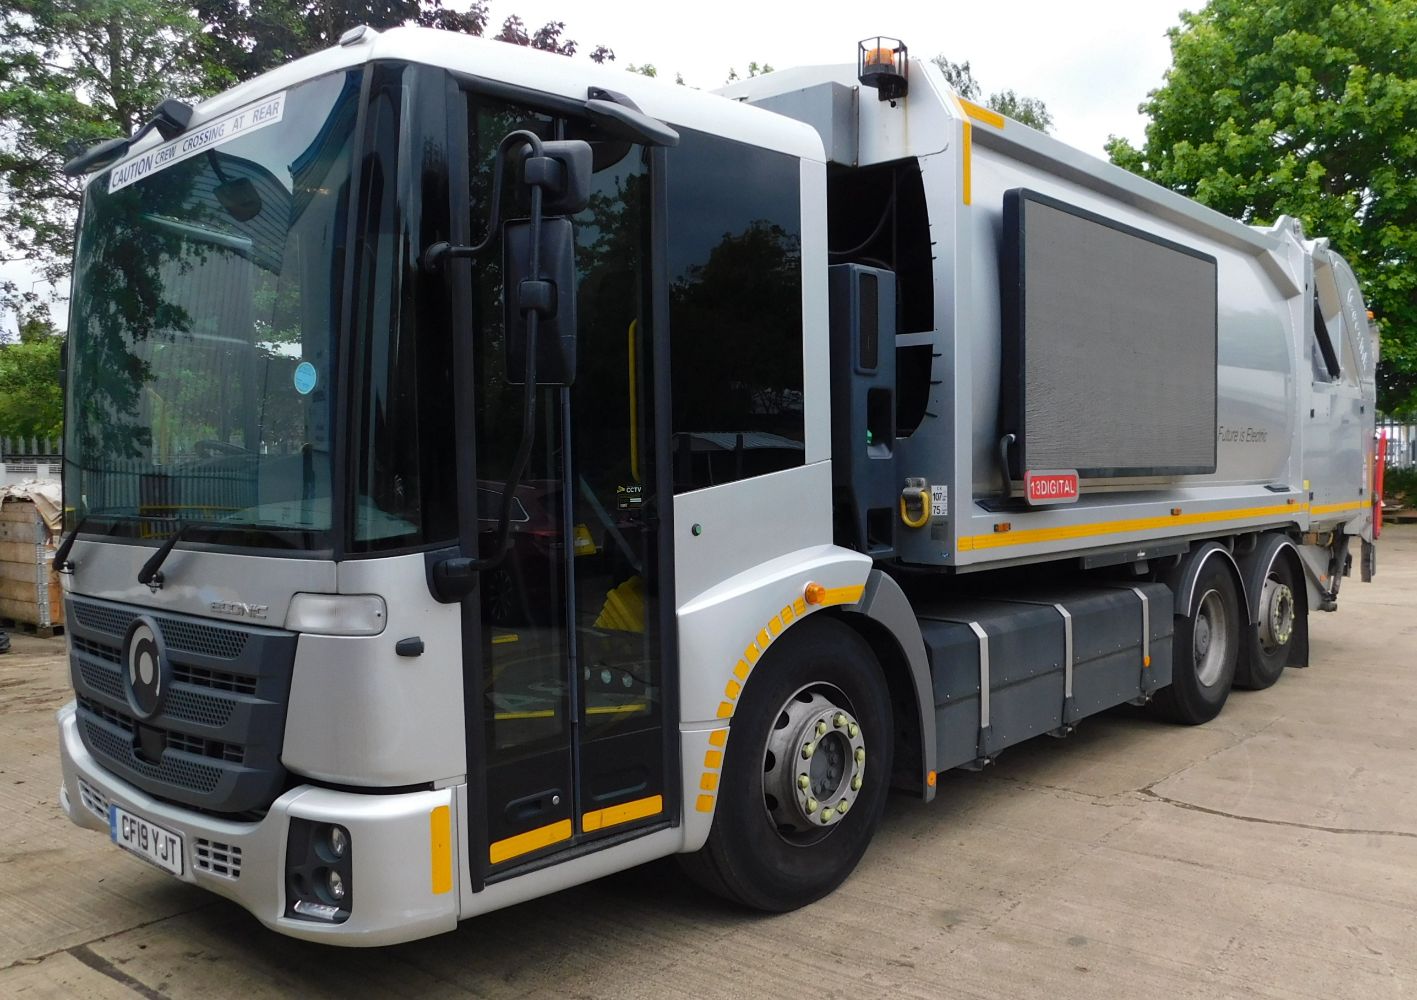 EMOSS ELECTRIC REFUSE LORRY, 3 INTERCHANGEABLE LIFTING DEVICES, COMMERCIAL VEHICLE MAINTENANCE & WORKSHOP EQUIPMENT